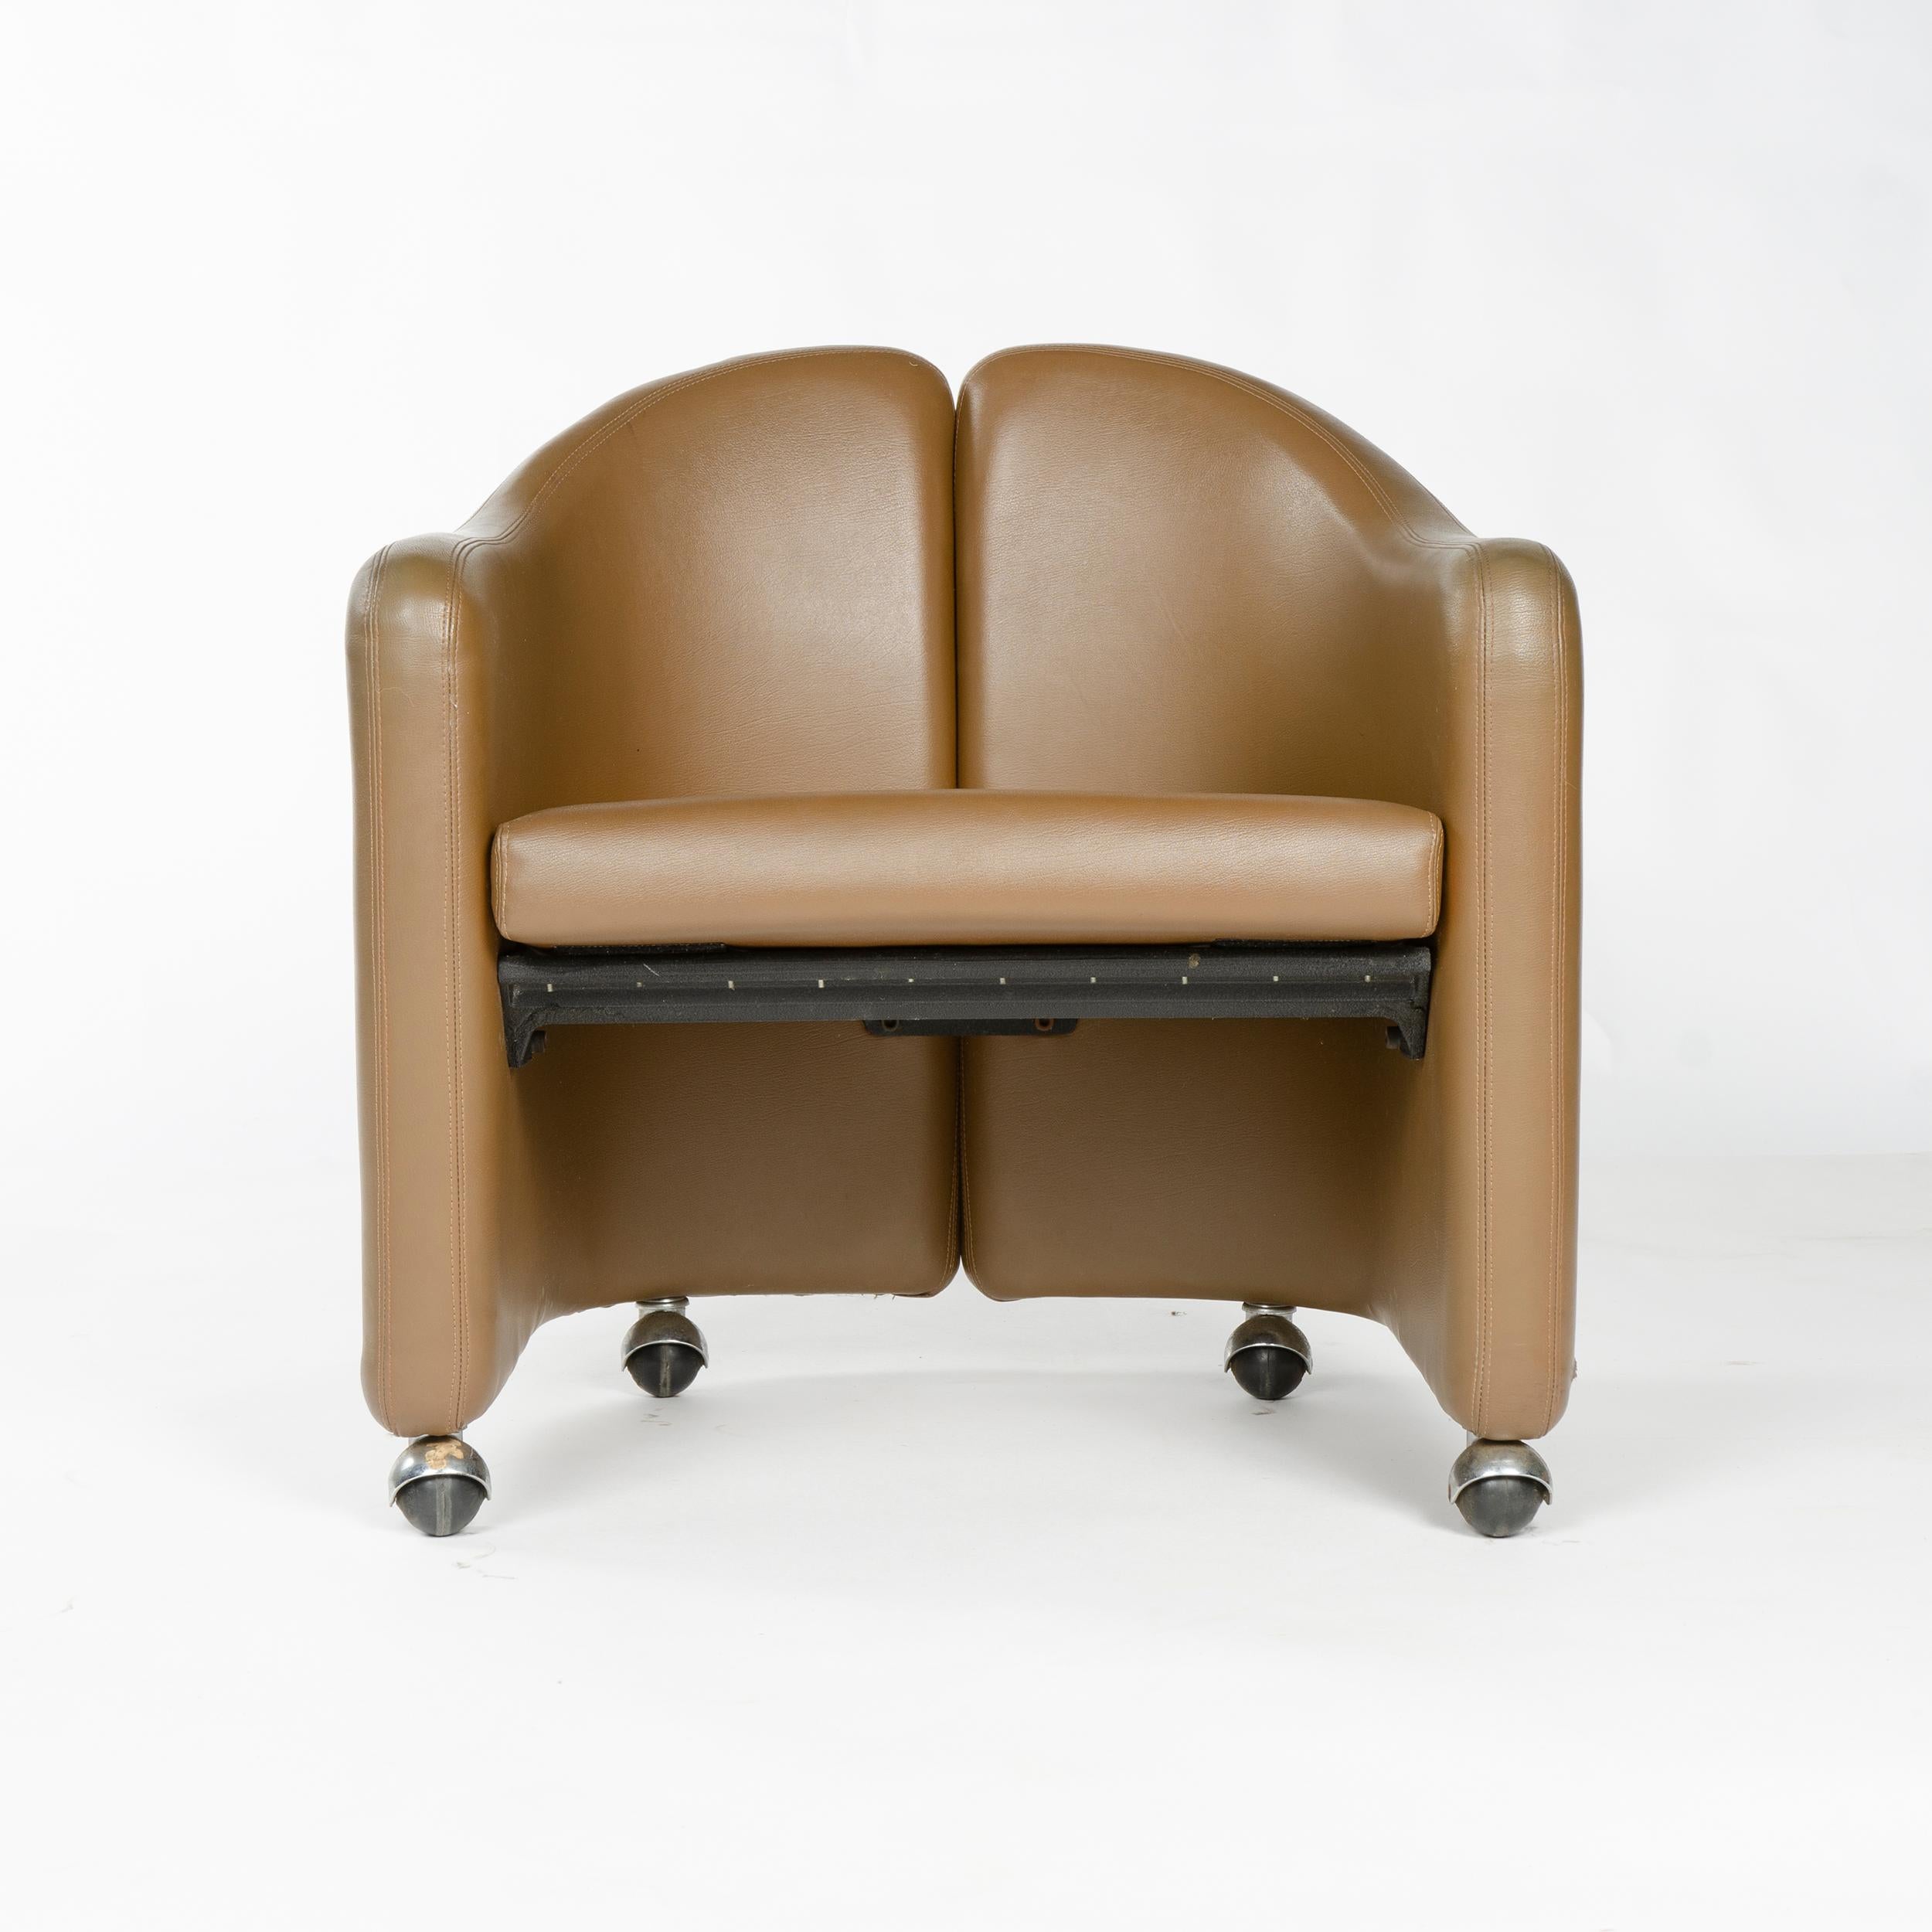 Mid-Century Modern 1970s Italian Barrel-Back Desk or Cocktail Chair by Eugenio Gerli for Tecno For Sale